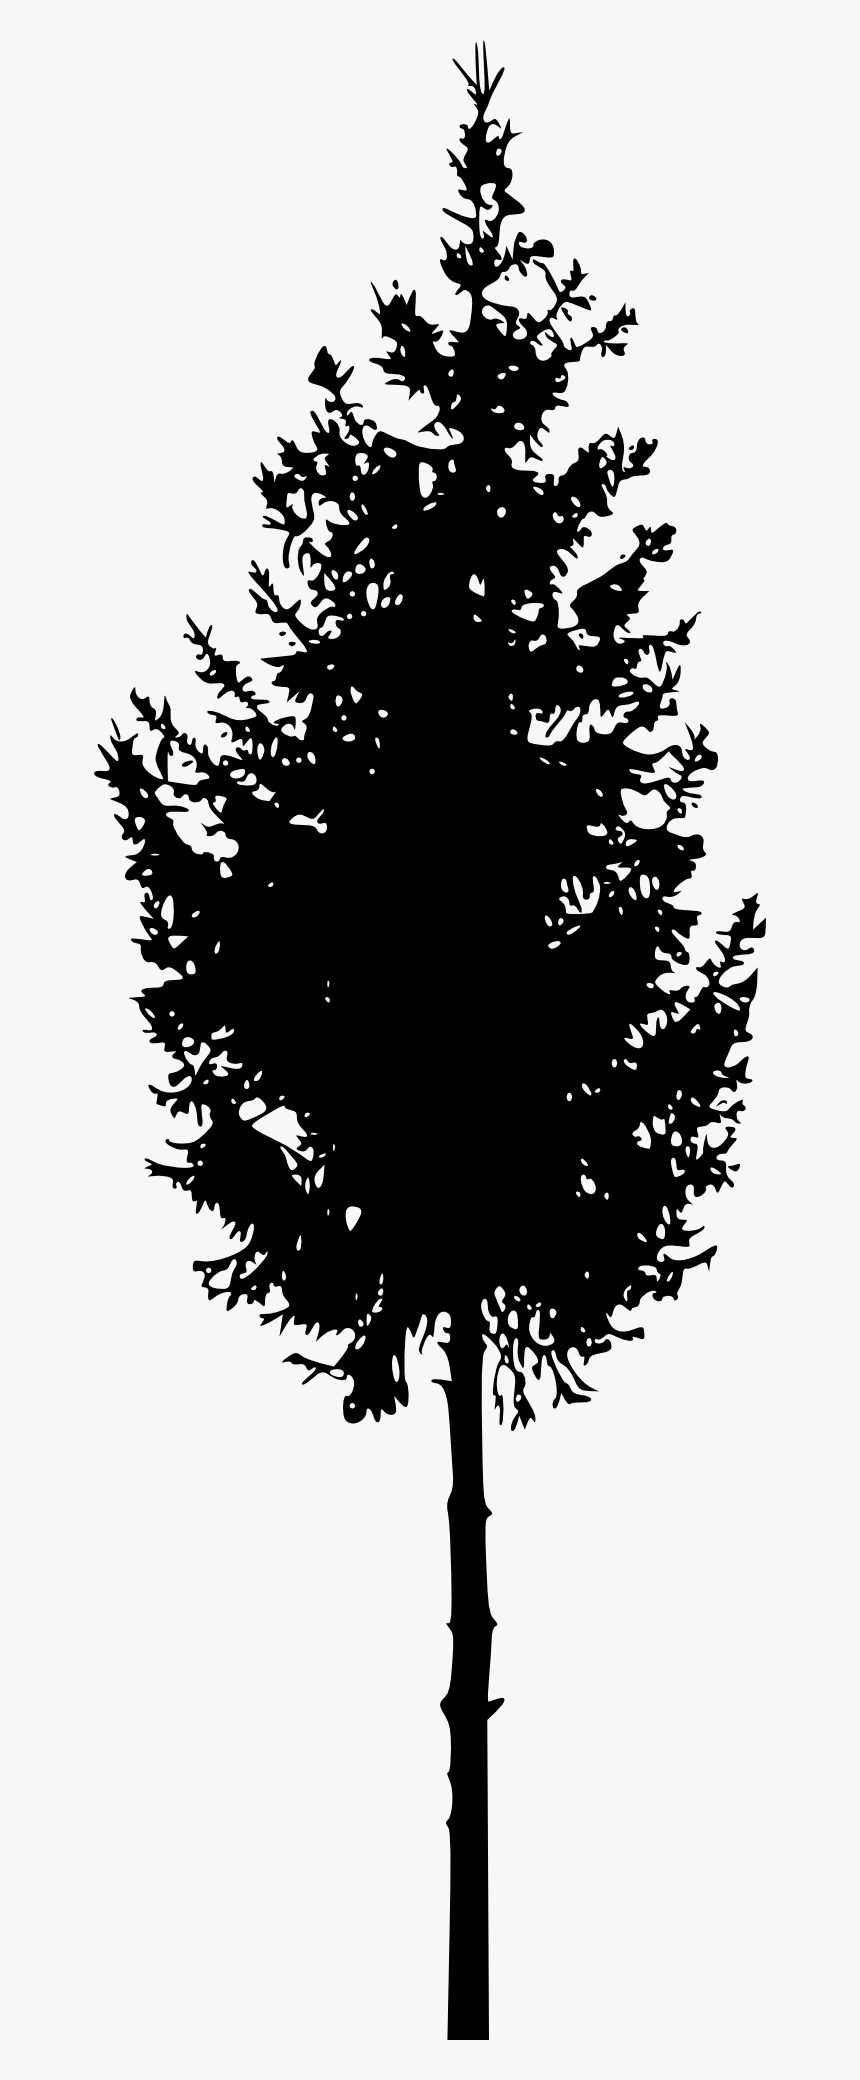 45 Tree Silhouettes Png Transparent Background - Silhouette Tree Png Black, Png Download, Free Download